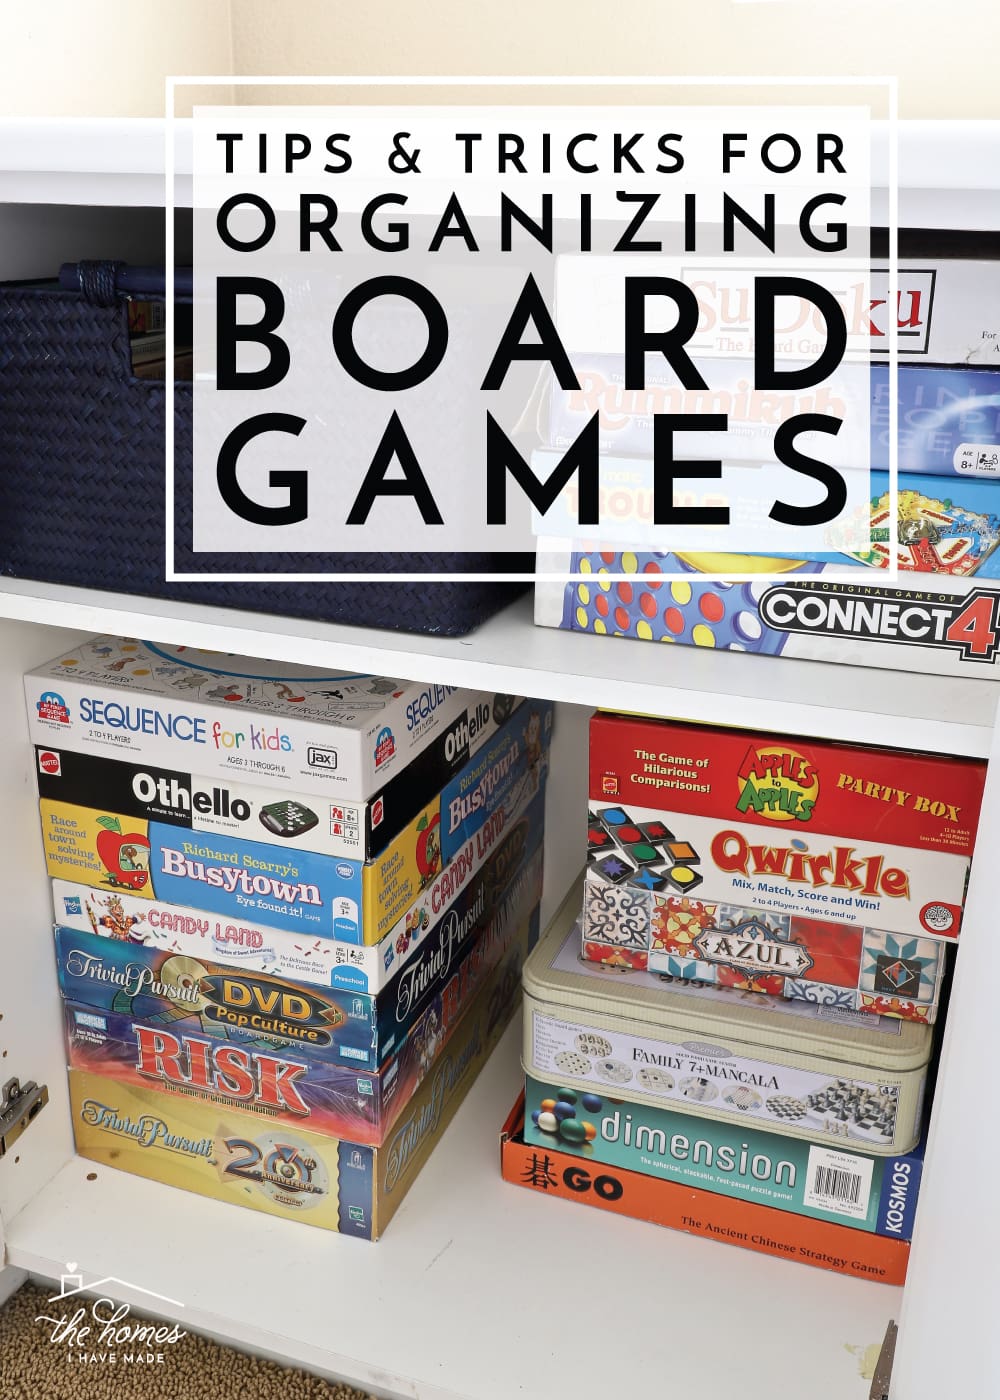 Vertical image of board games stacked inside a cabinet with text overlay 